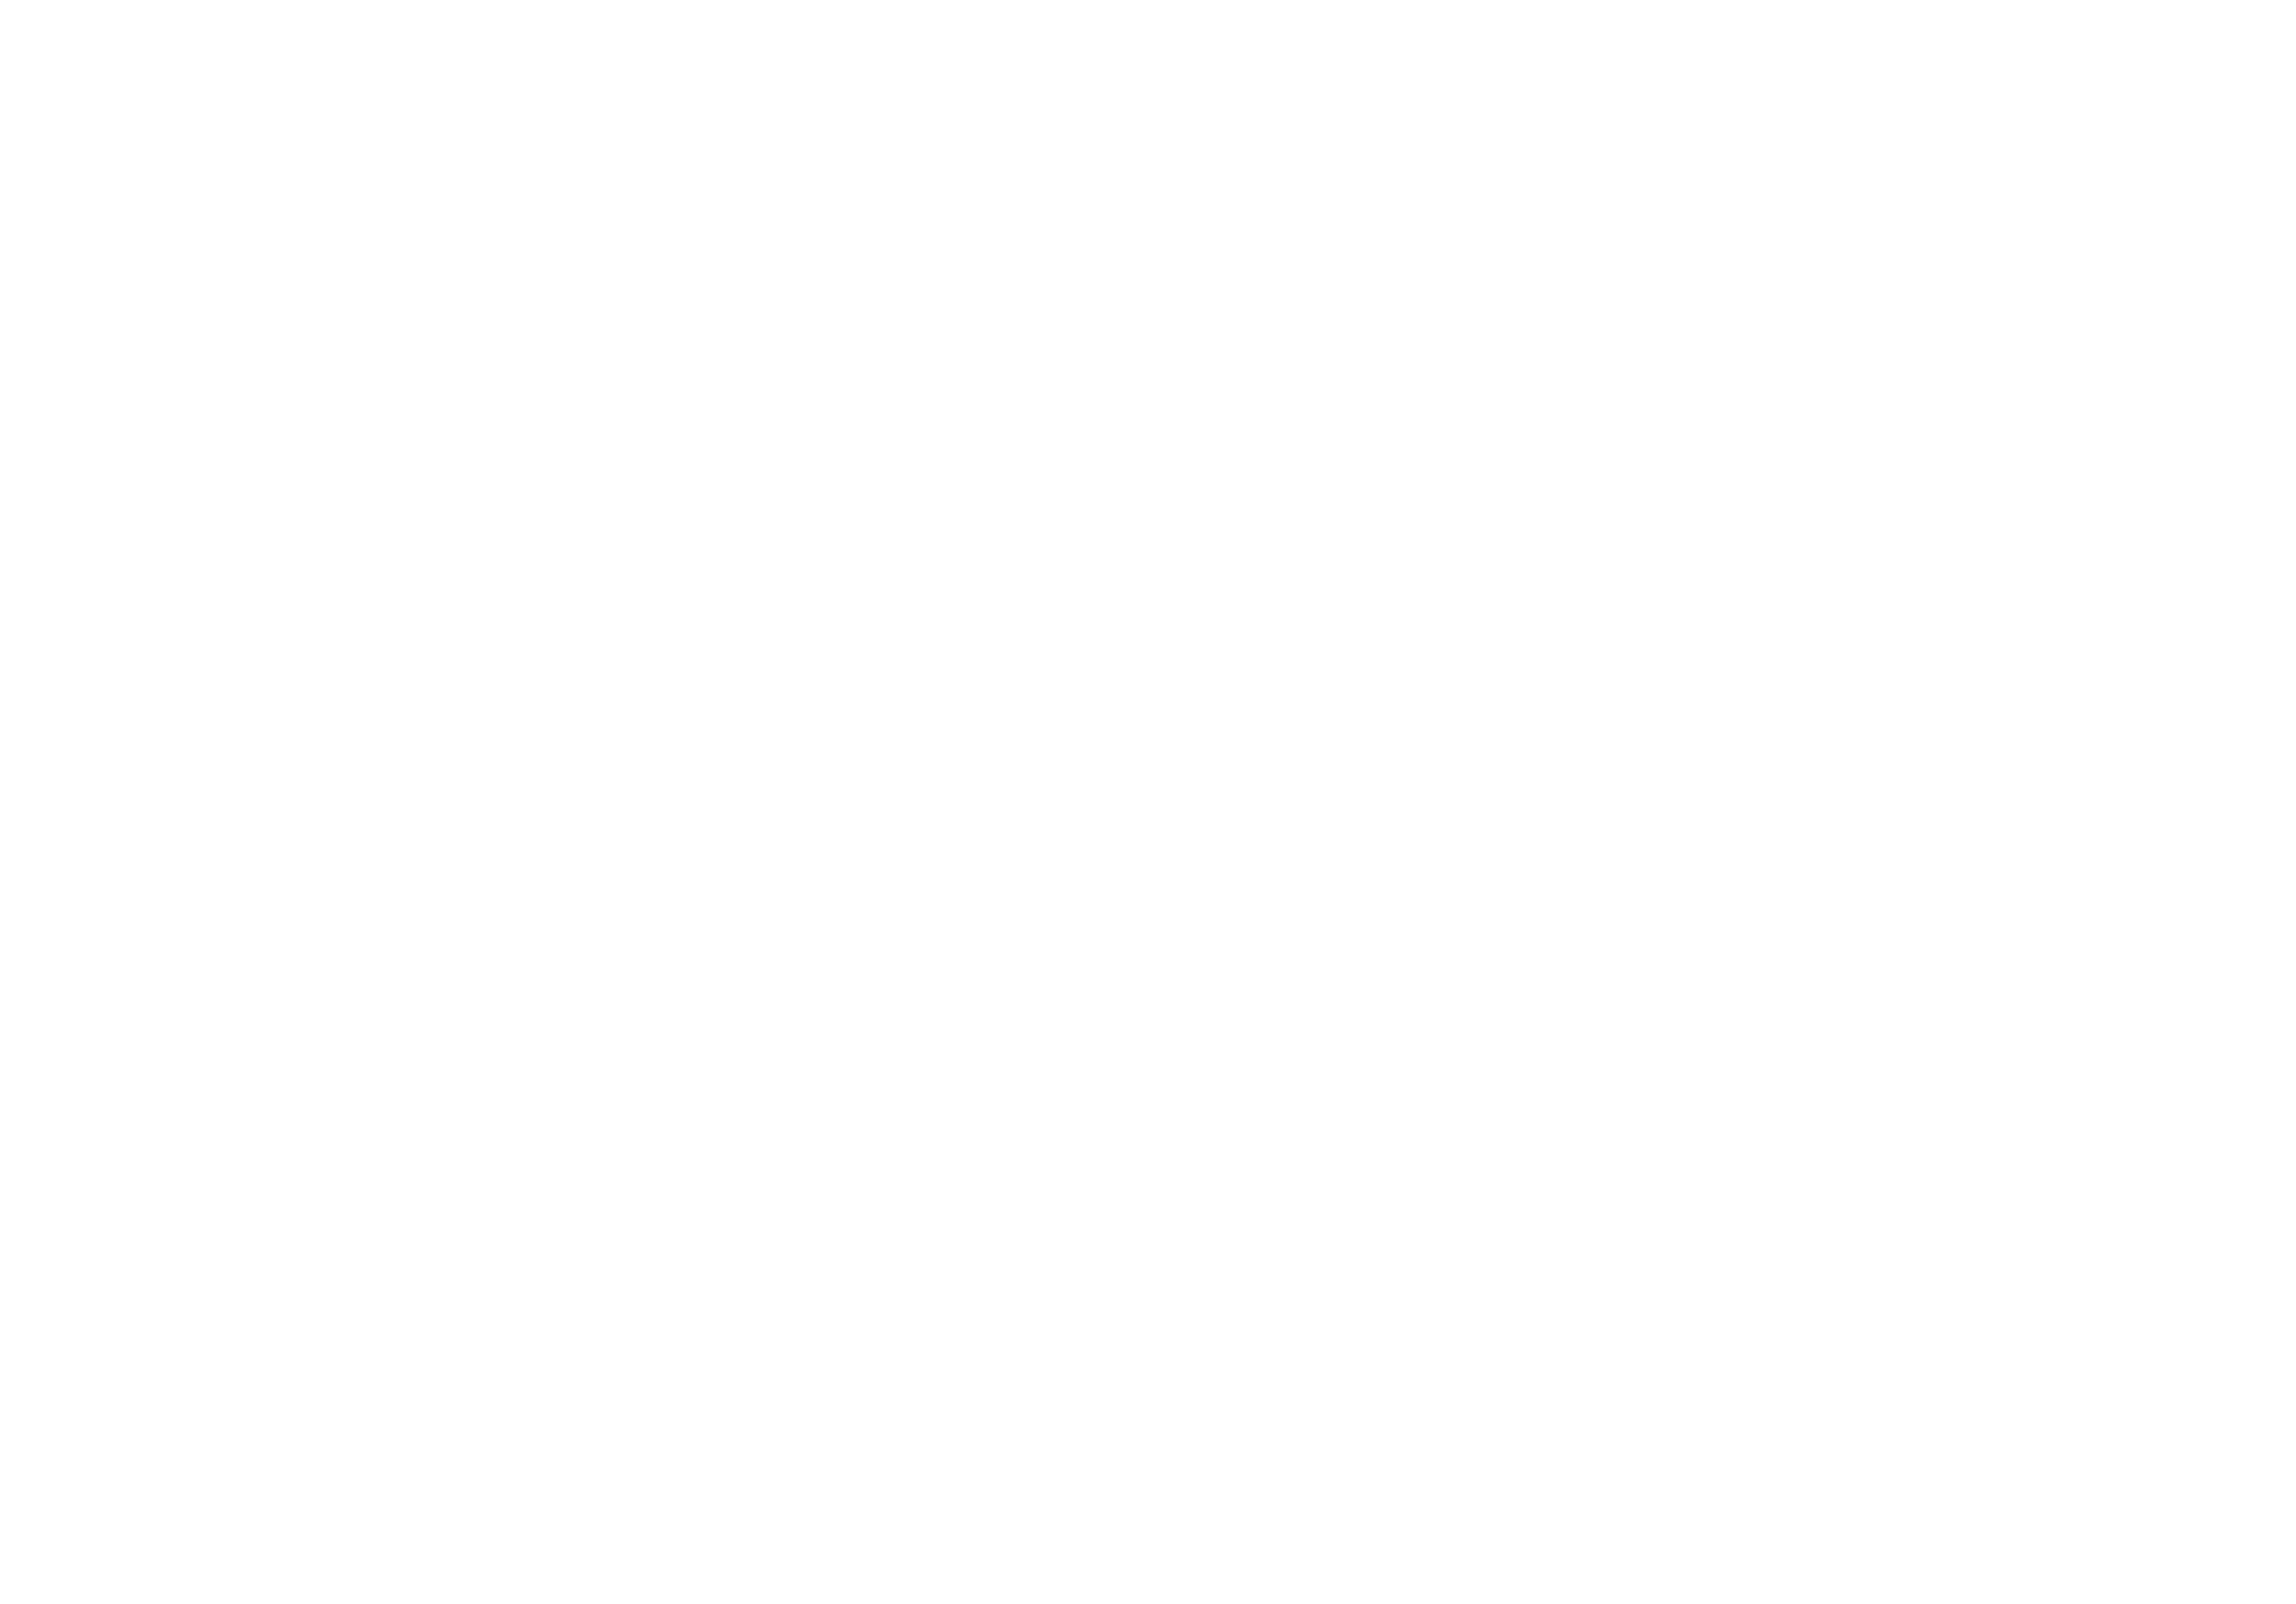 Dreams are not real